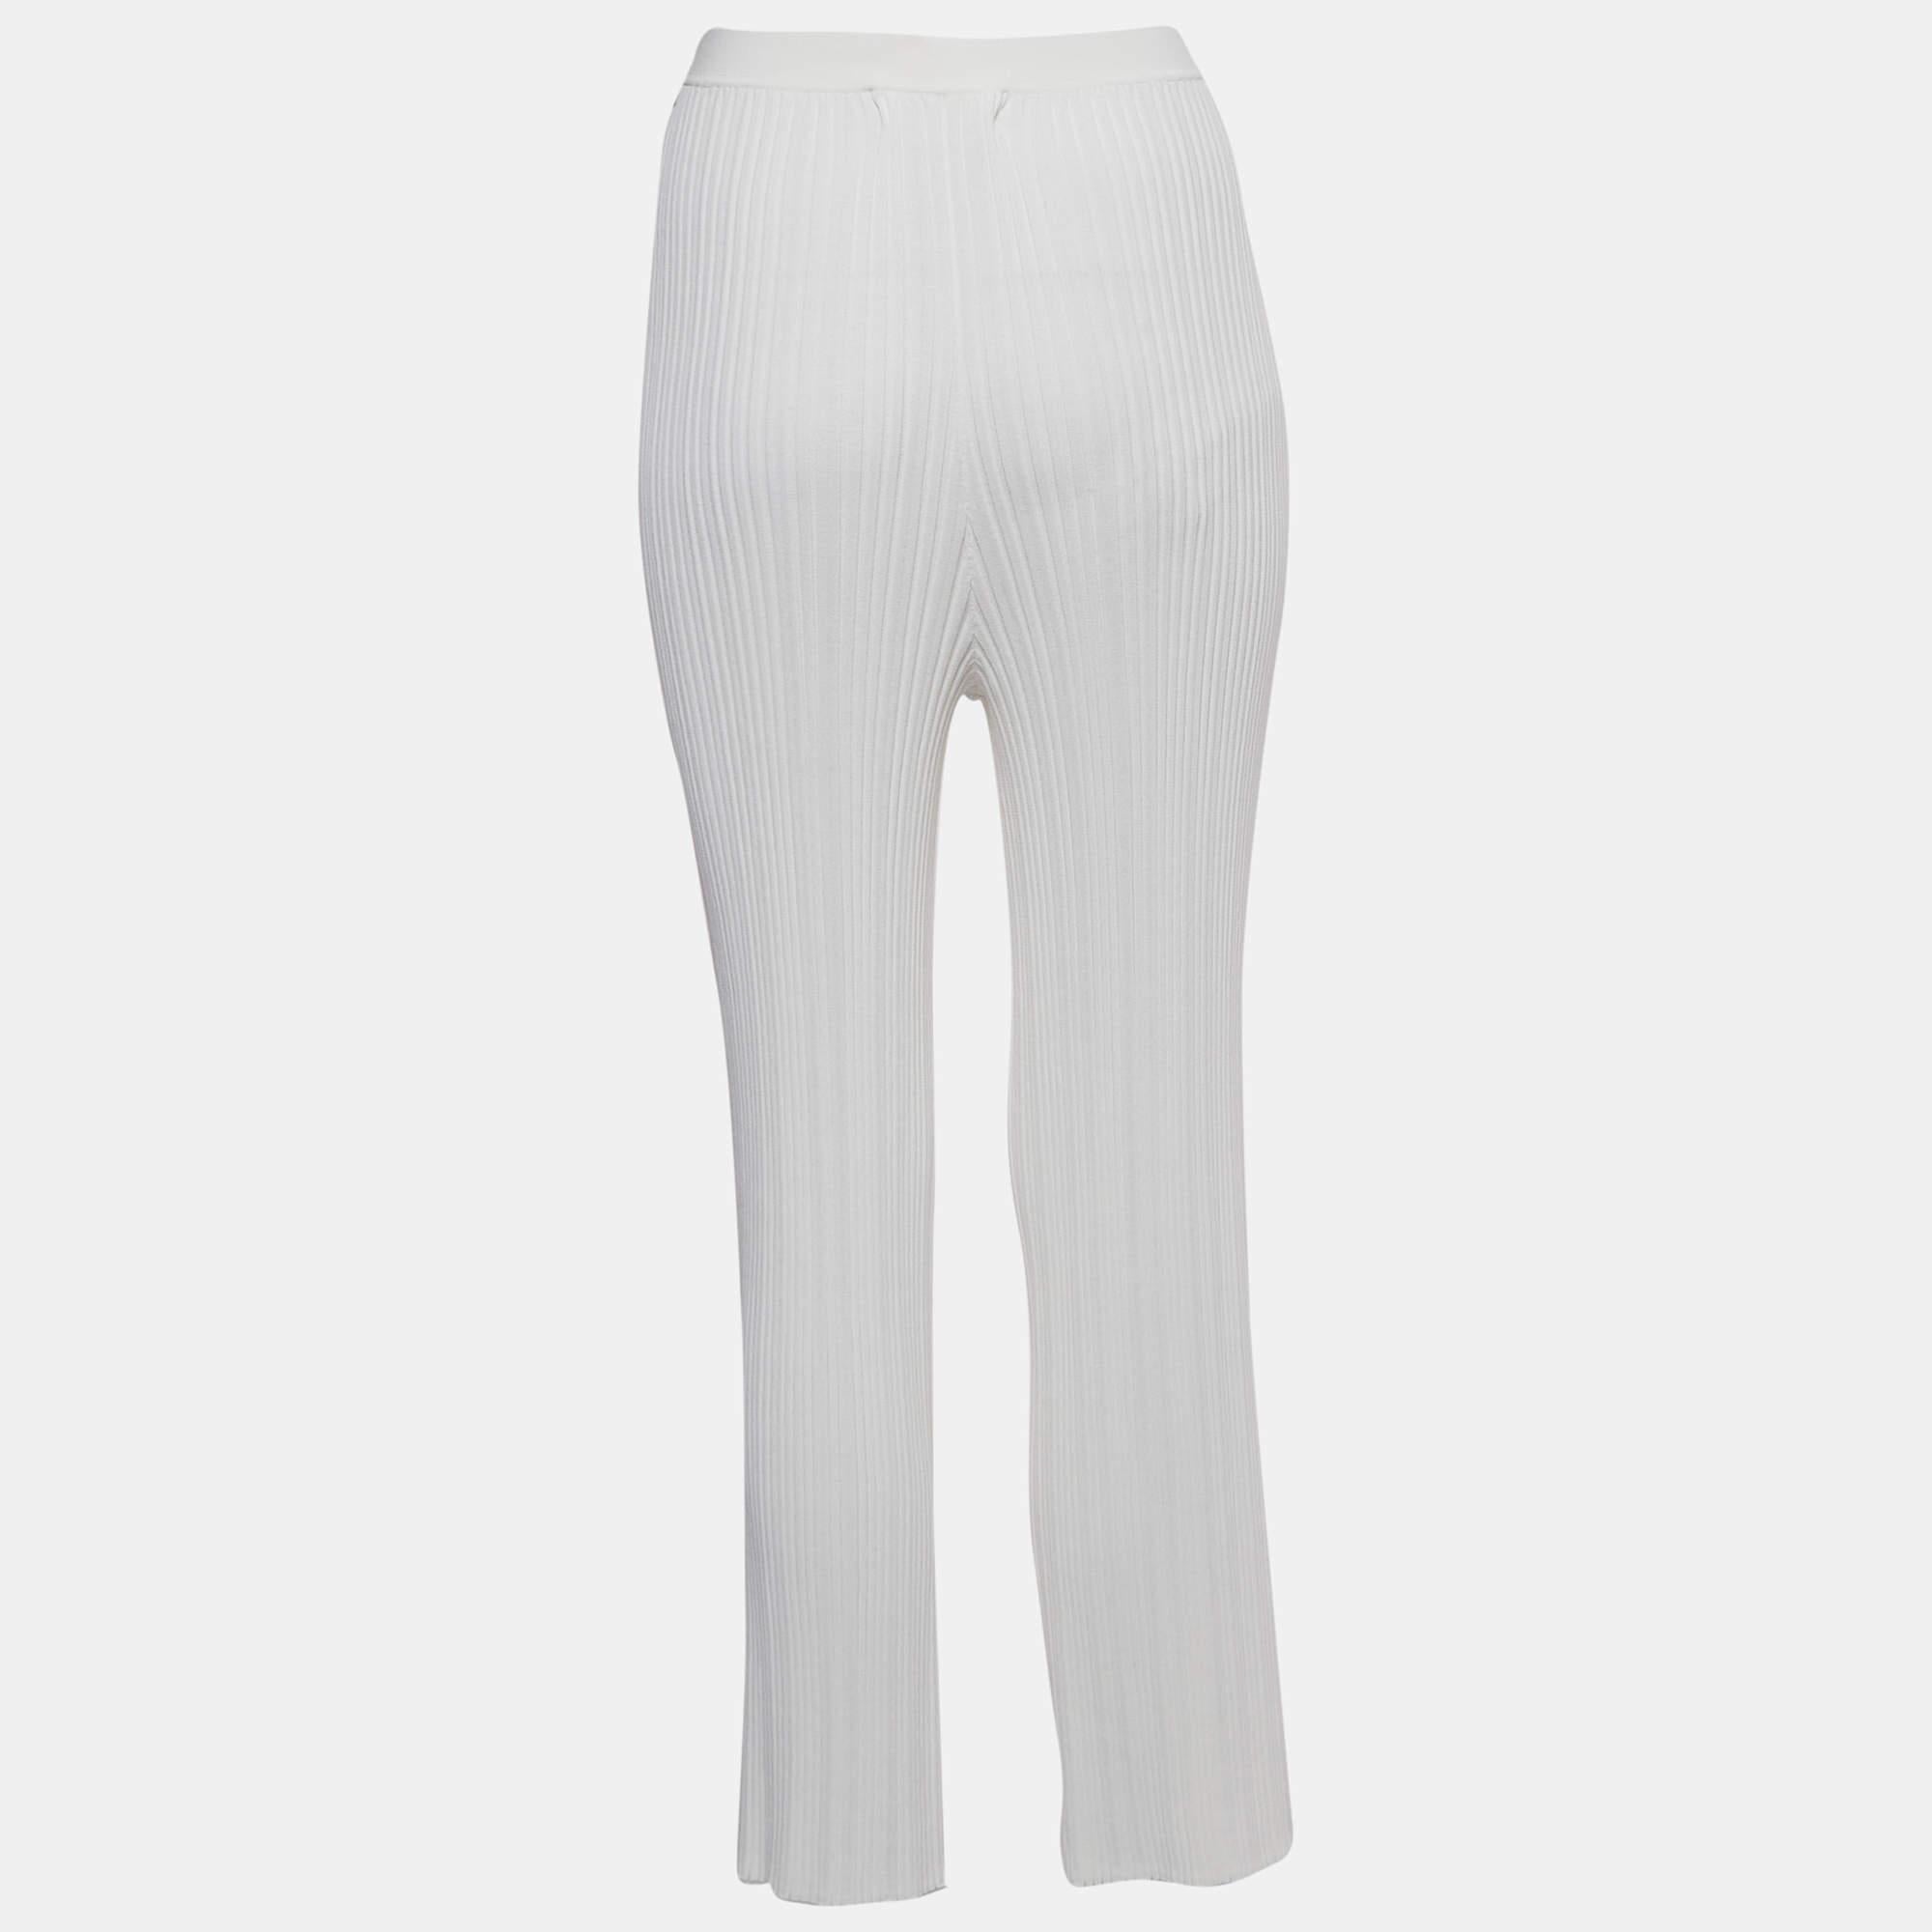 Dion Lee's pants showcase modern elegance. The ribbed texture adds depth, while the ivory hue exudes sophistication. Tailored for comfort and style, these pants seamlessly blend versatility with a luxurious feel, making them a fashion statement for